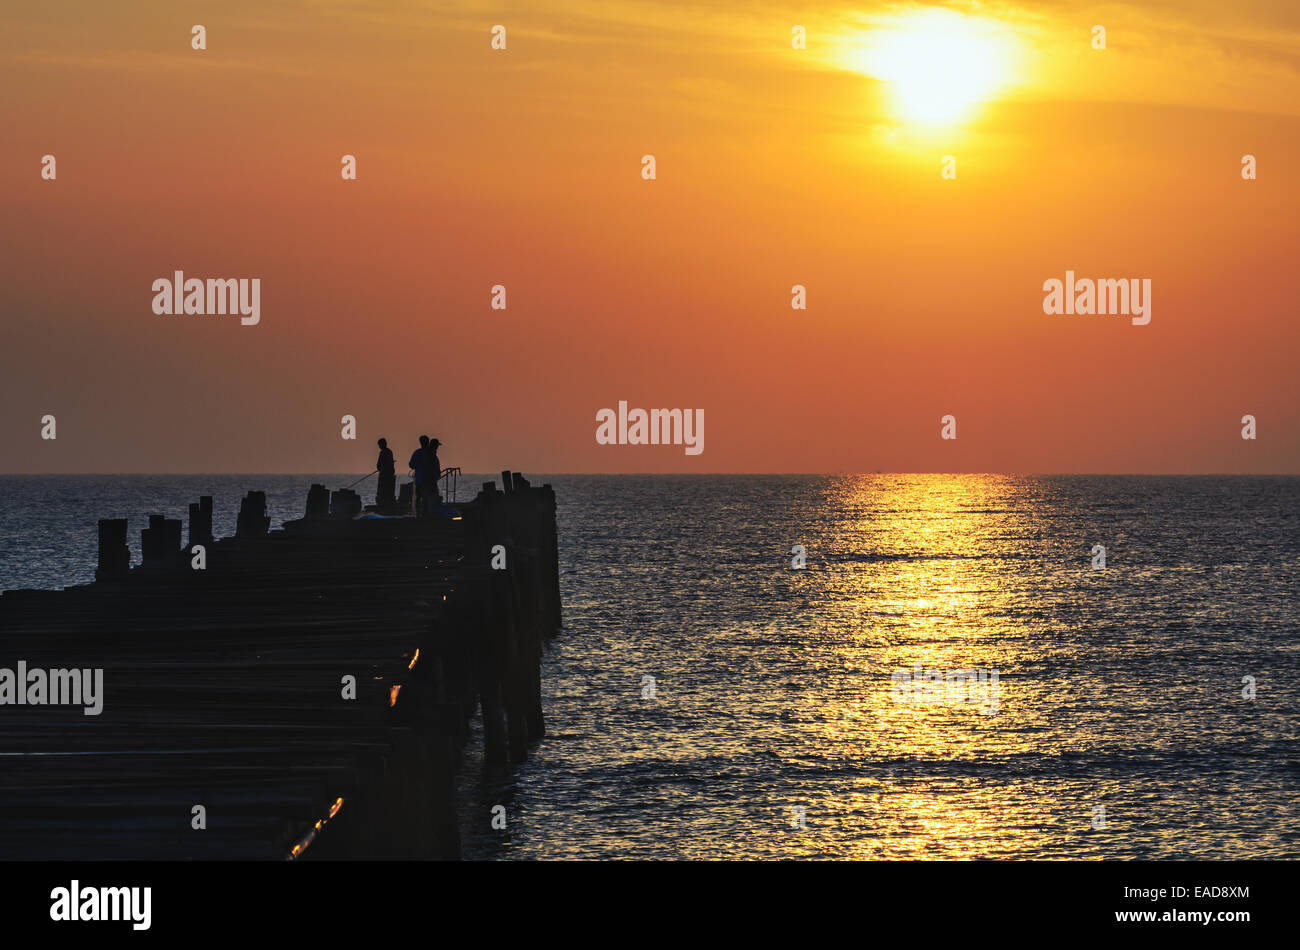 Silhouette fisherman on the old wooden bridge and sea at sunrise in rural Thailand. Stock Photo